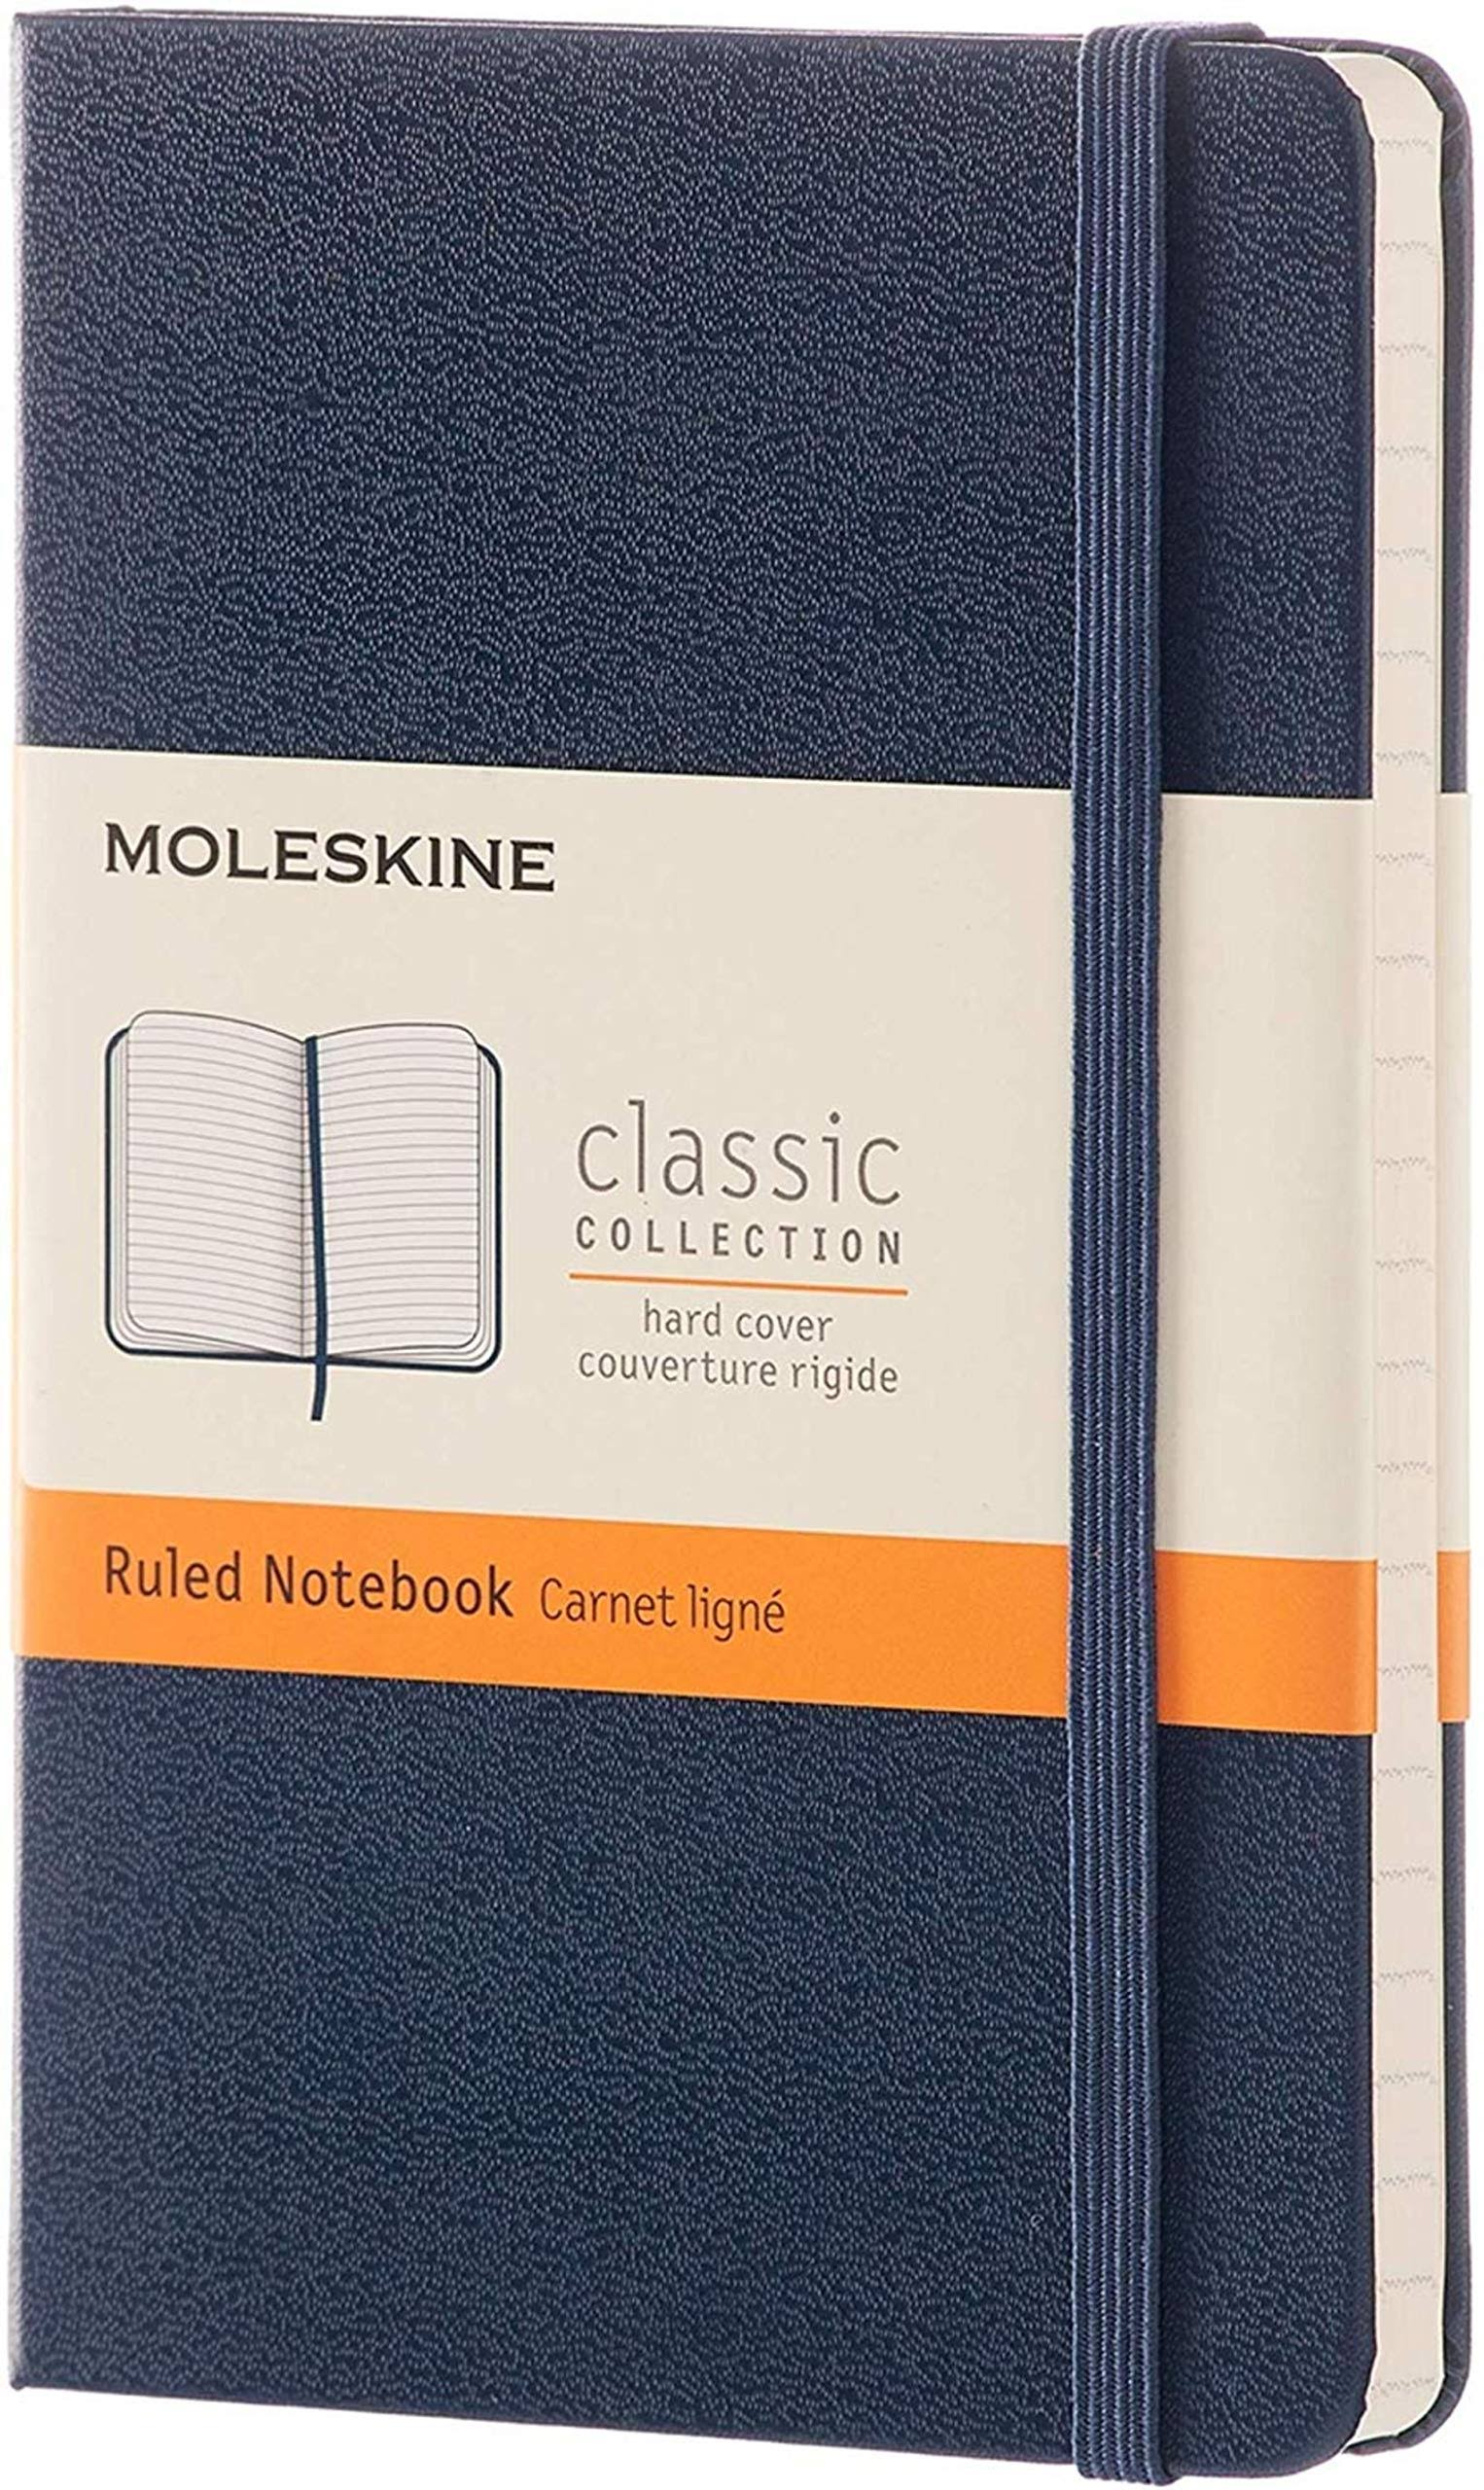 Moleskin Classic Collection Ruled Notebook - Blue